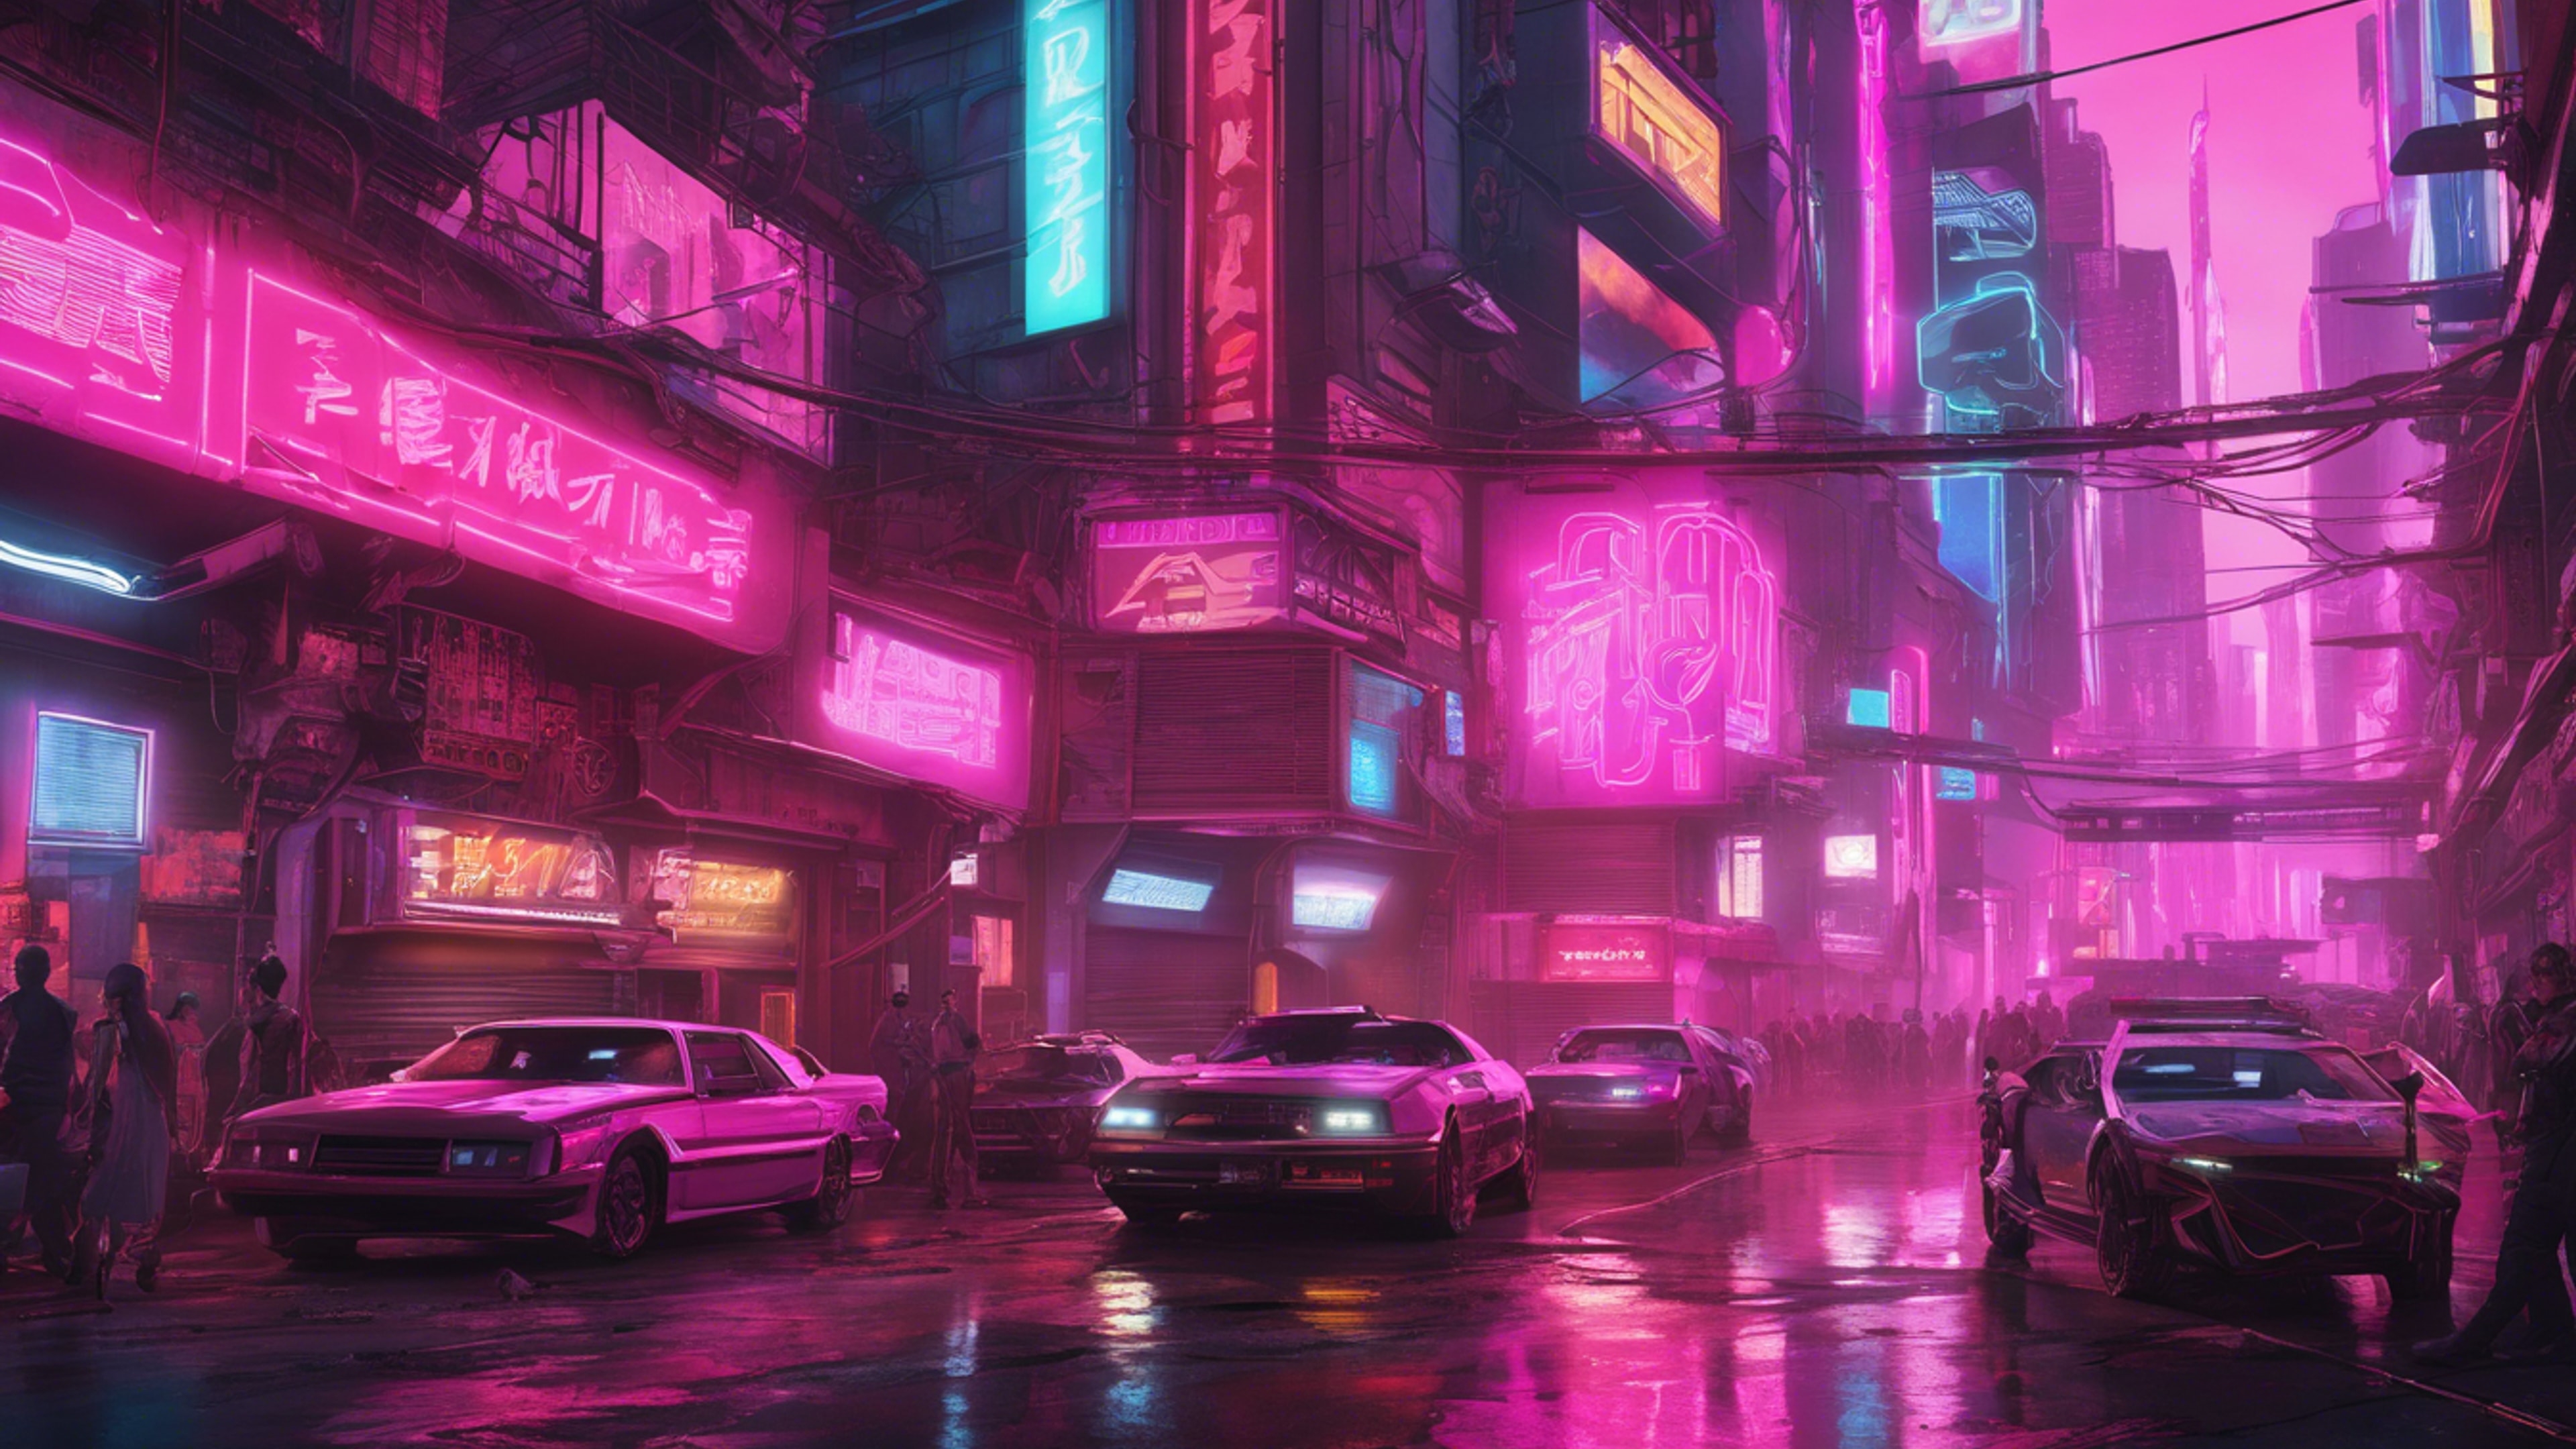 A wide-angle view of a bustling city street in the future, dominated by pink neon signs. Tapetai[5759e15553a14a8aa13a]